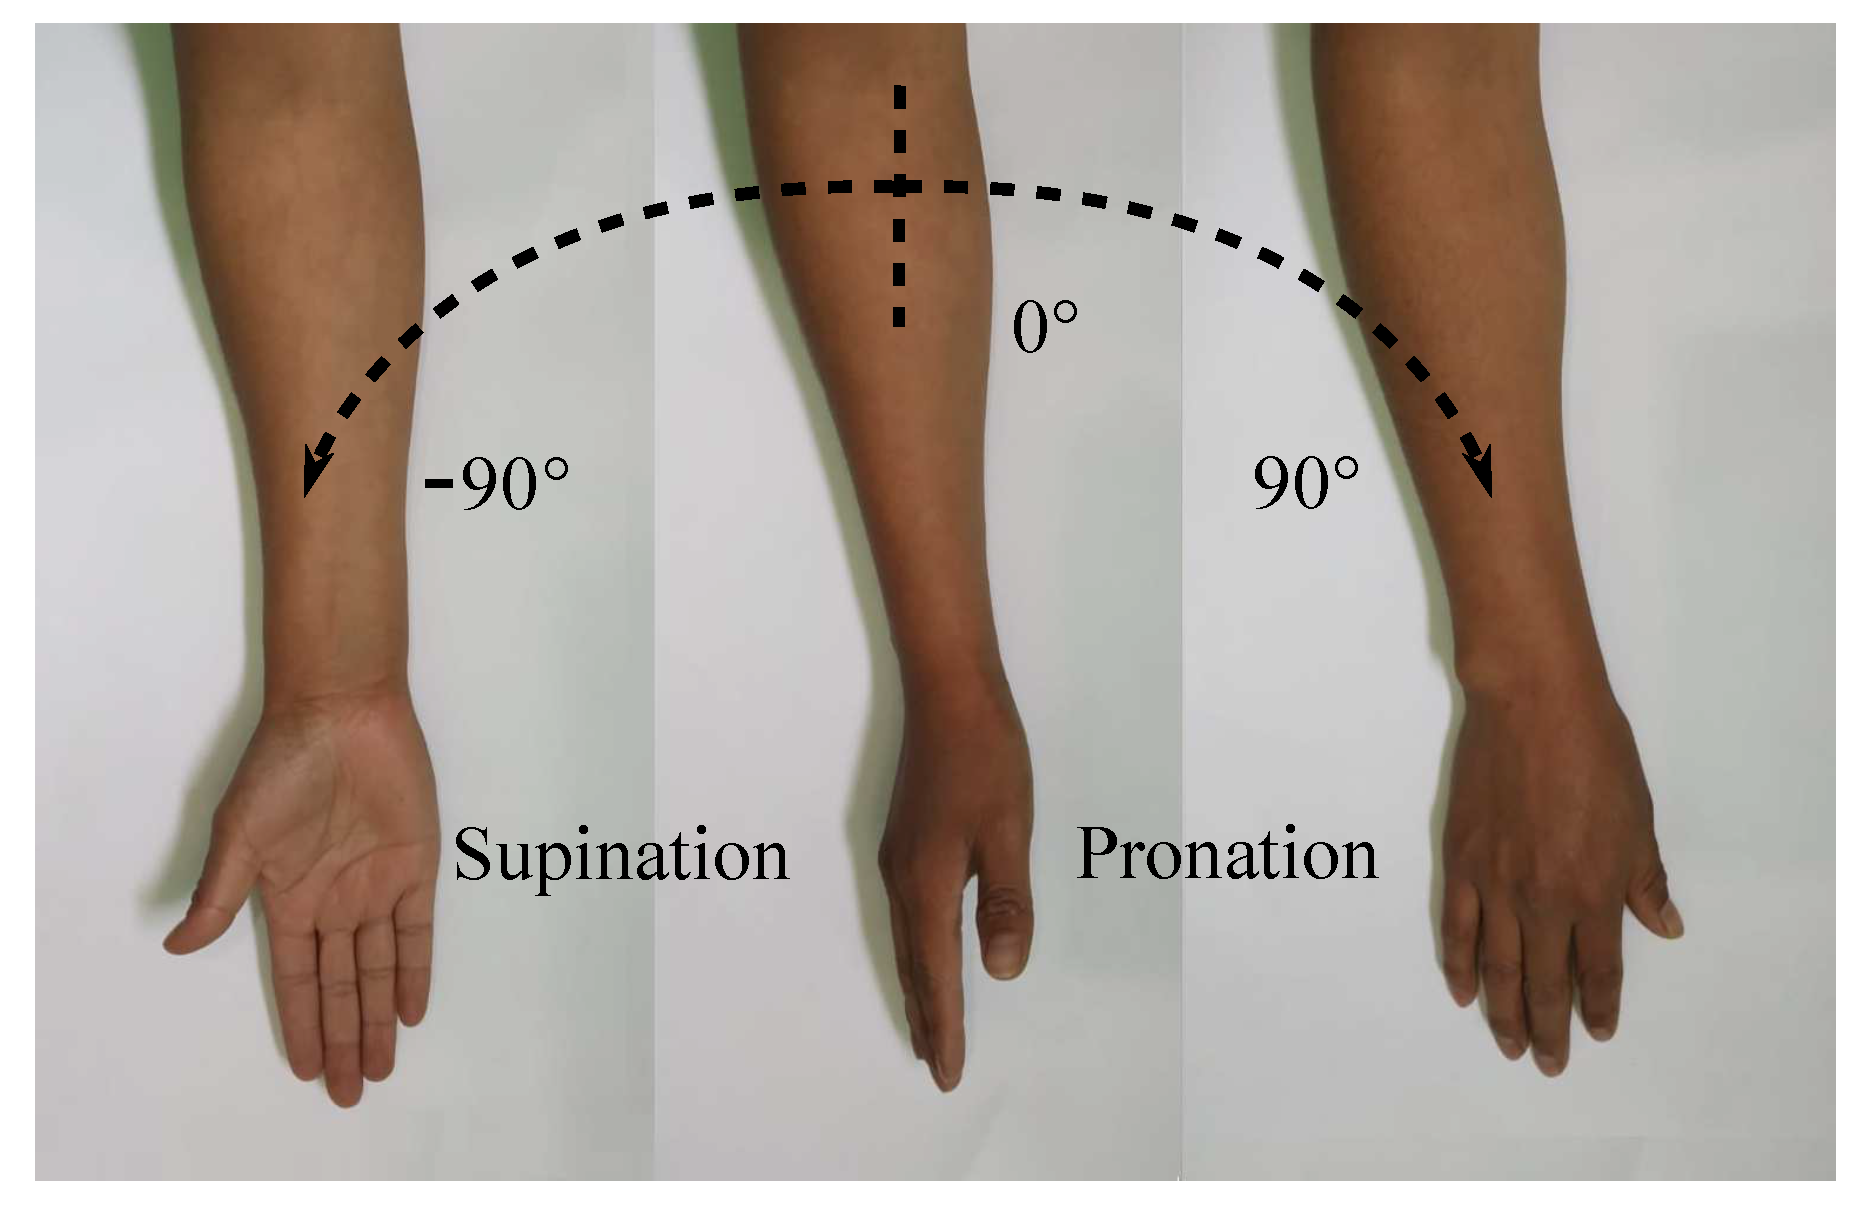 Pronation and Supination of the Forearm. Pronation and Supination